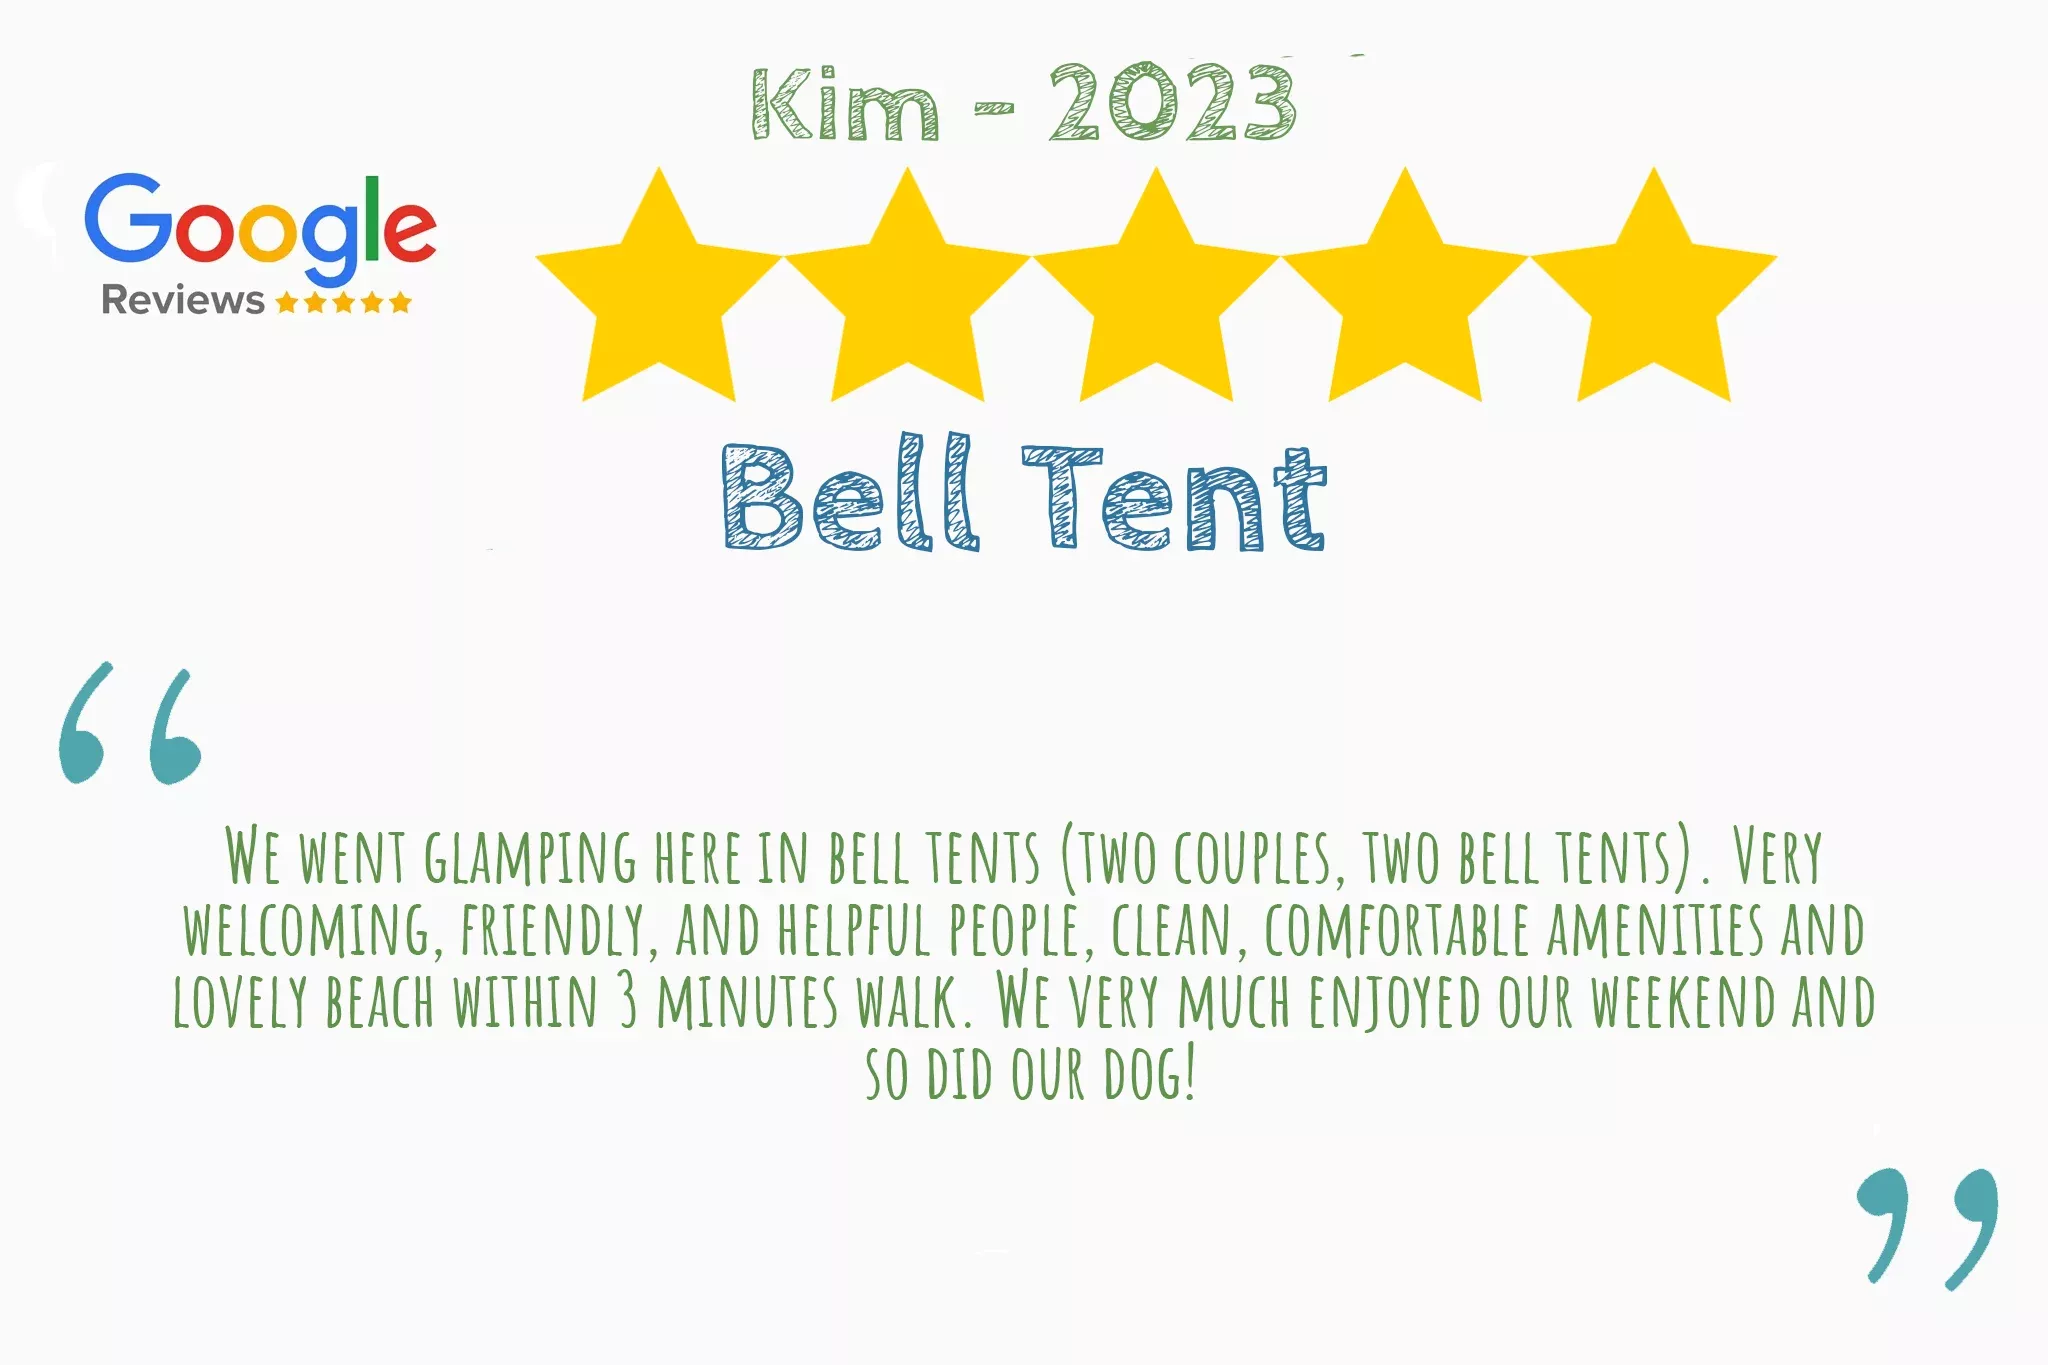 5 star Google review from Kim that says "We went glamping here in bell tents (two couples, two bell tents). Very  welcoming, friendly, and helpful people, clean, comfortable amenities and  lovely beach within 3 minutes walk. We very much enjoyed our weekend and  so did our dog!"